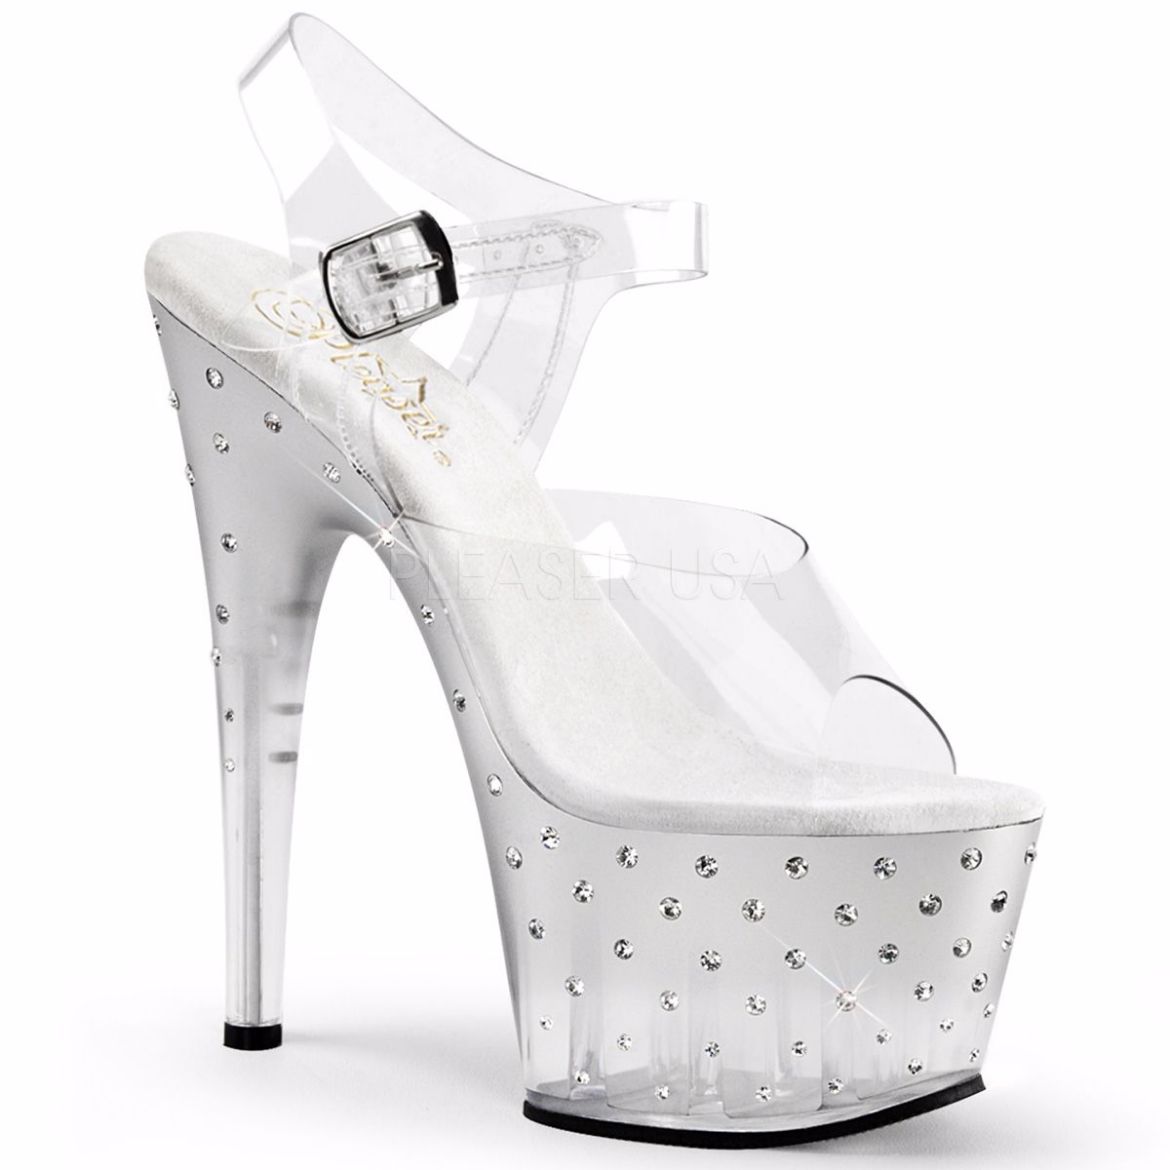 Product image of Pleaser Stardust-708T Clear/Silver-Clear, 7 inch (17.8 cm) Heel, 2 3/4 inch (7 cm) Platform Sandal Shoes